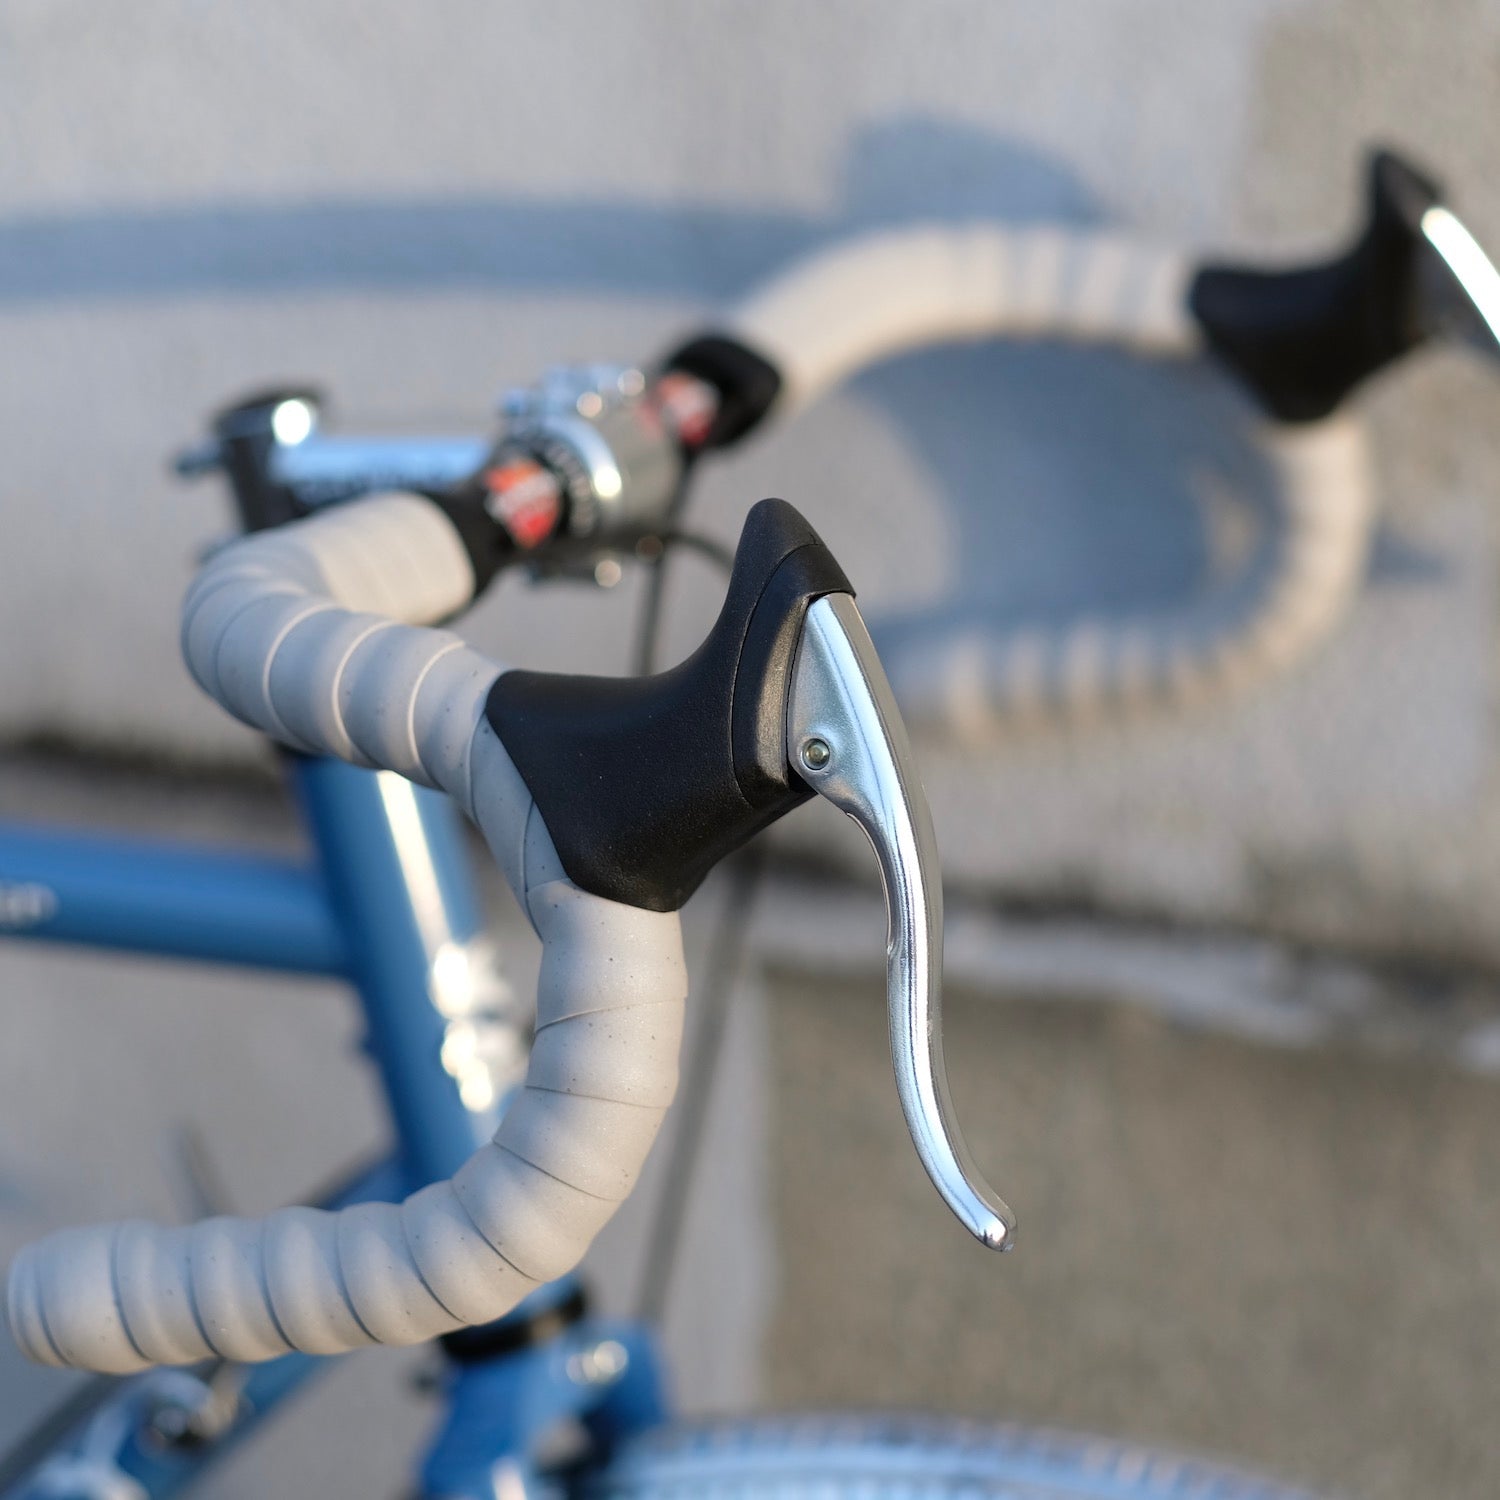 CRUST BIKES The Hand Sanitizer Levers